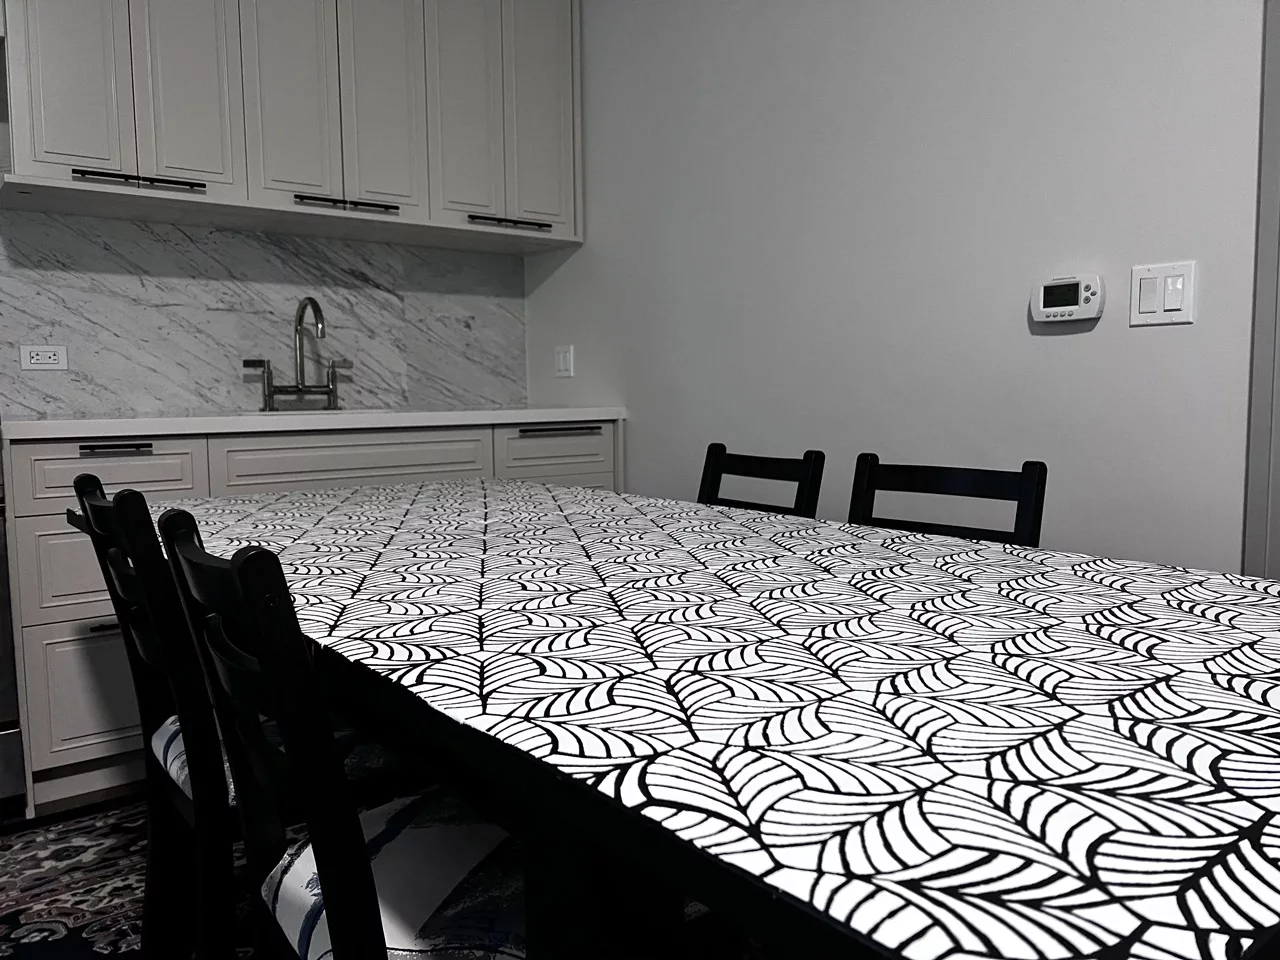 A table with an endlessly repeating pattern formed by a single leaf within a modern kitchen.